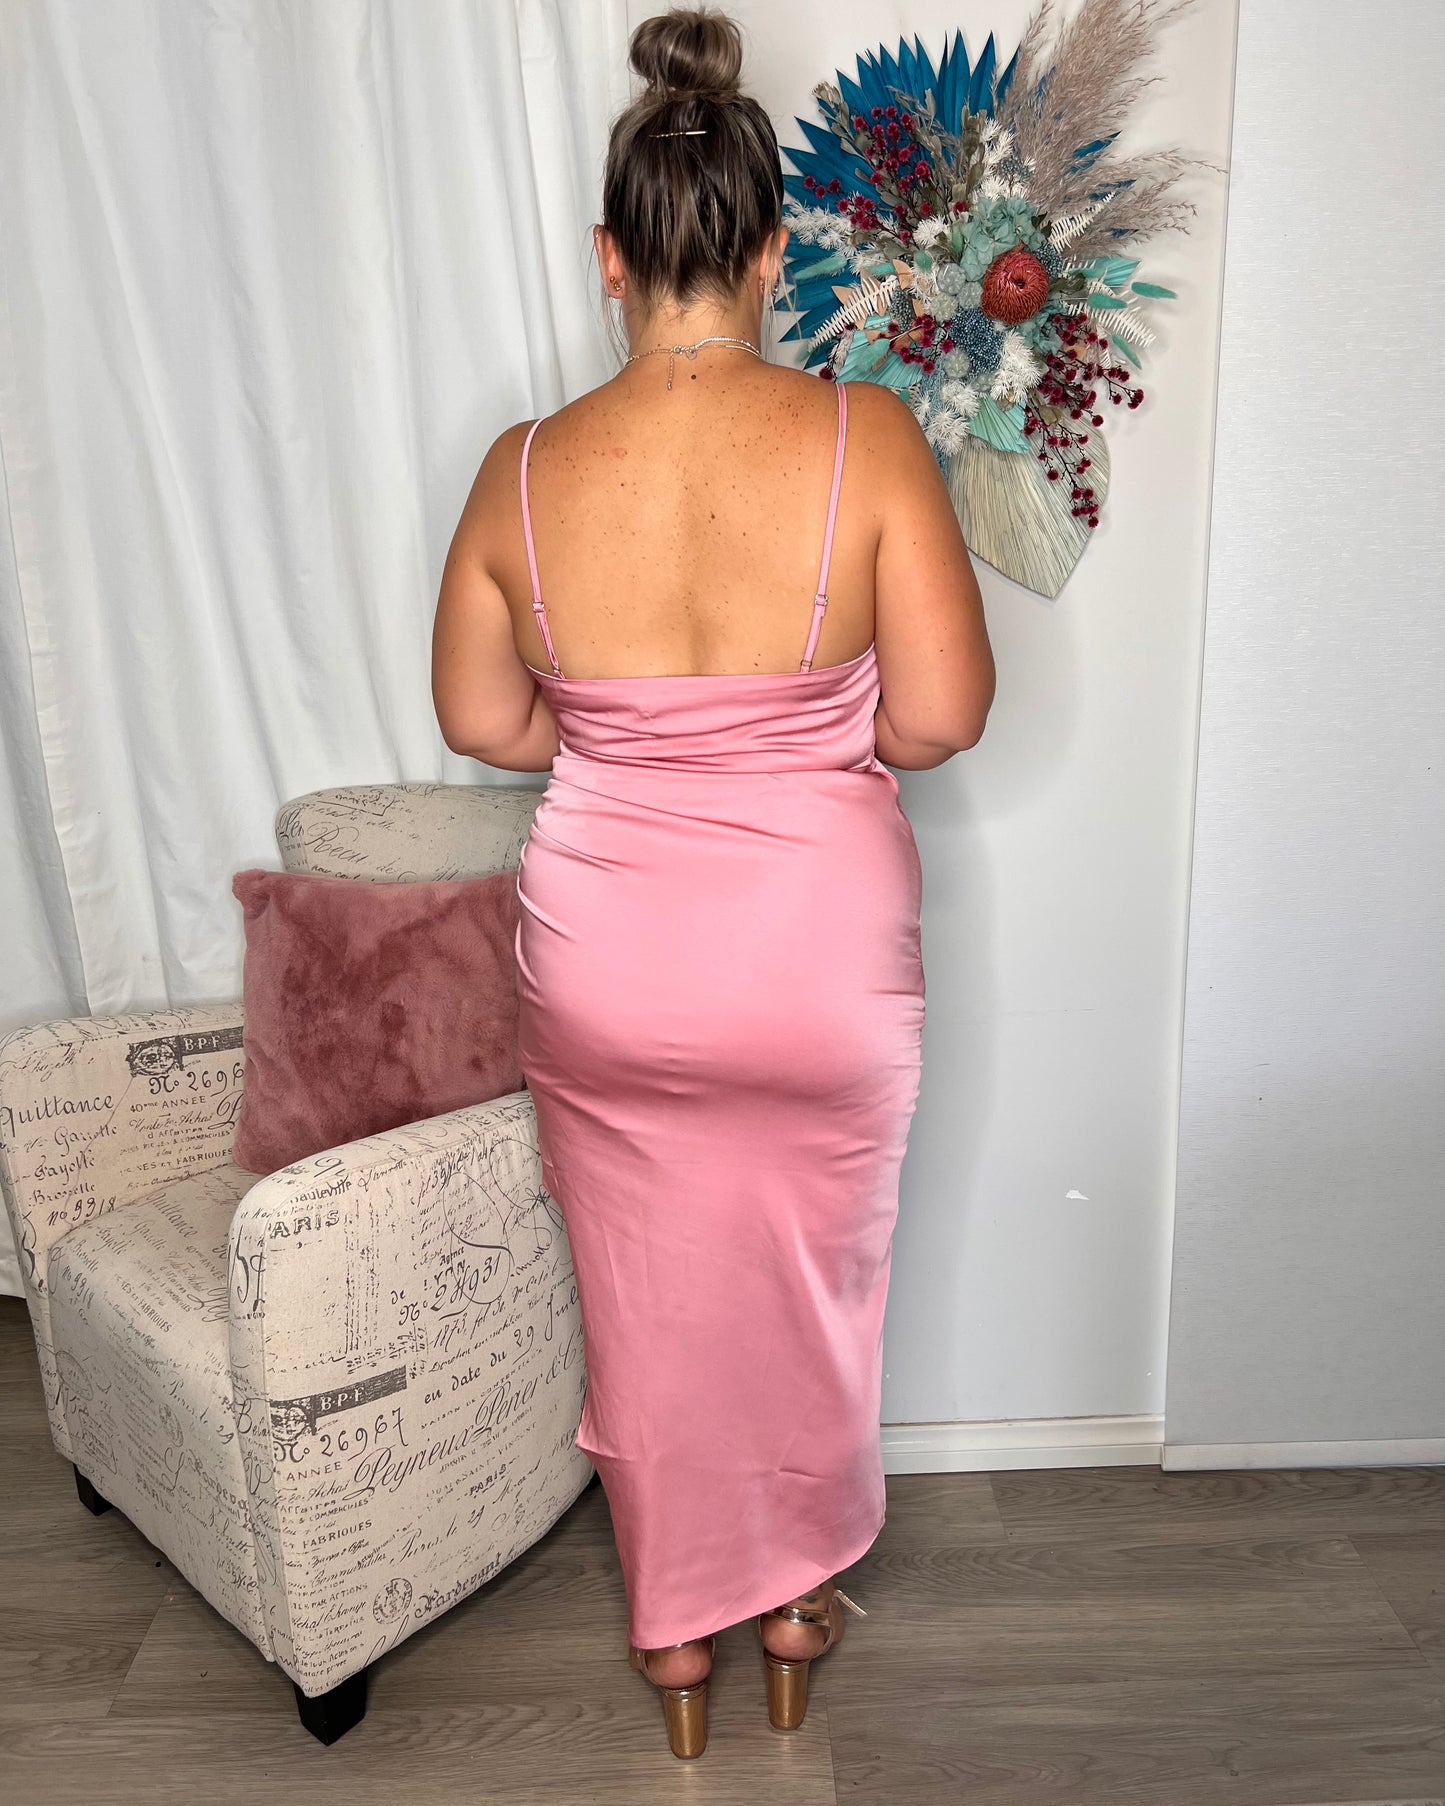 Haidee Dress: 
This satin feel cocktail dress is the perfect addition to your next girls night or cocktail function

Zip up back
Adjustable straps
Choose size according to your bo - Ciao Bella Dresses 